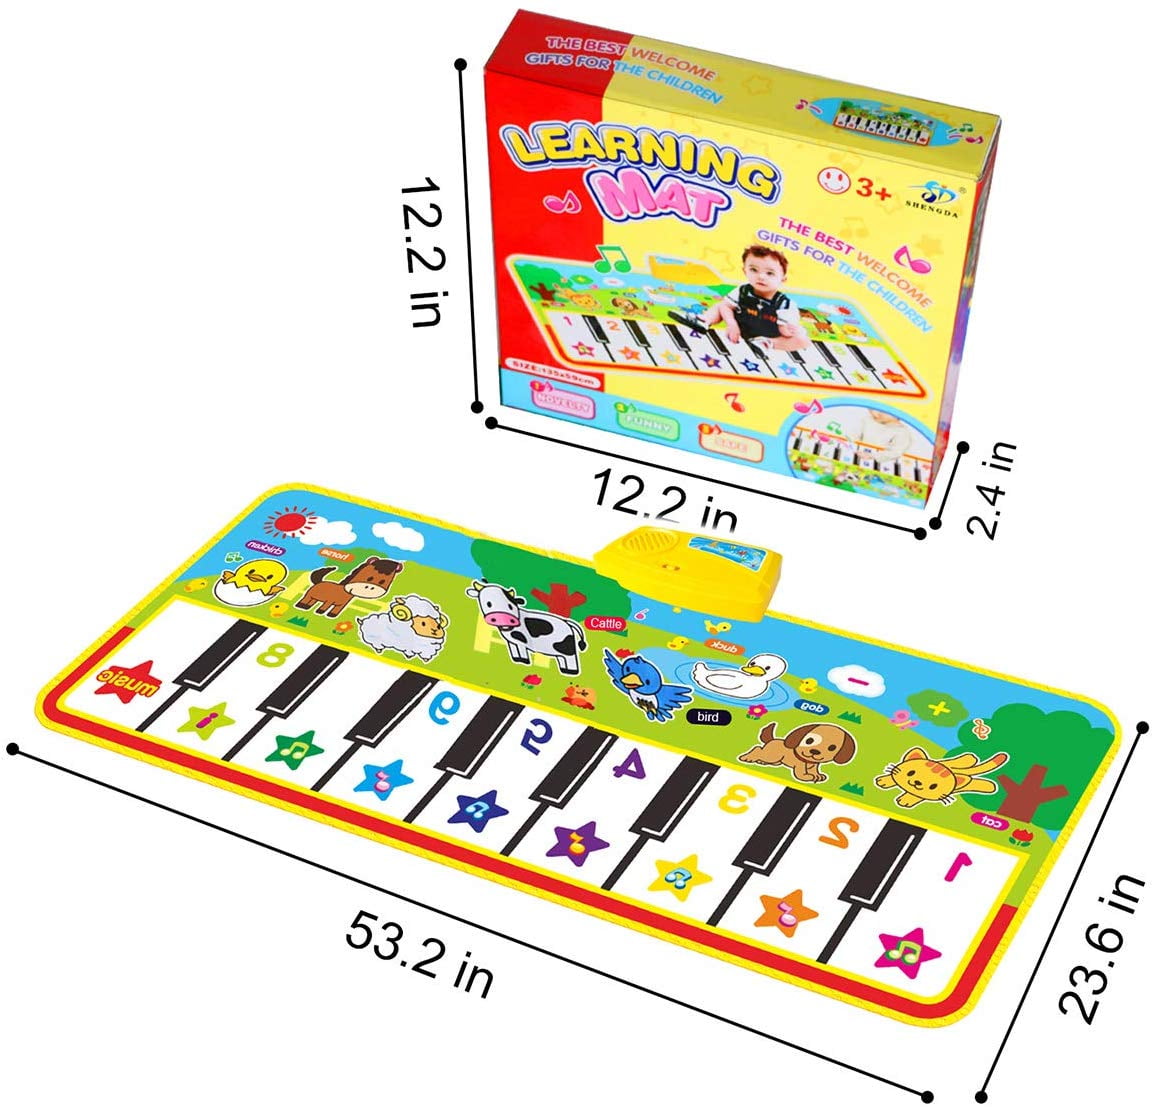 M SANMERSEN Musical Piano Mat 63 x 26 Keyboard Music Mat with 17 Keys/ 10 Demos/ 8 Instrument Sounds Touch Play Mat Musical Toys Gift for Kids Ages 3-10 